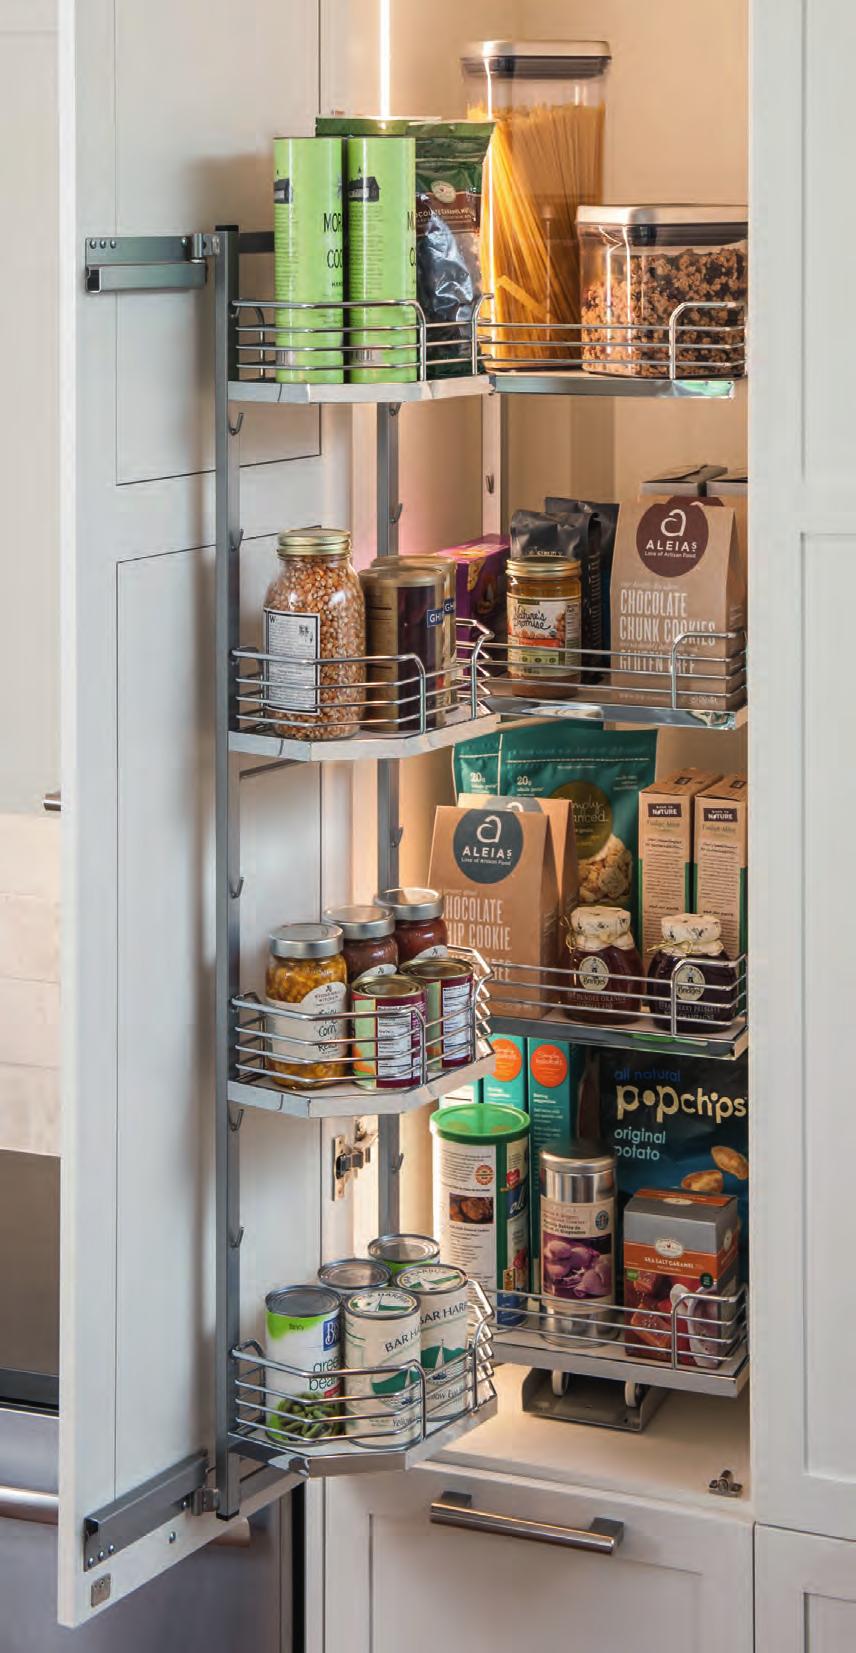 WITH TANDEM PANTRY, ONE PULL AND THE INTELLIGENTLY DESIGNED SHELVES AT THE REAR